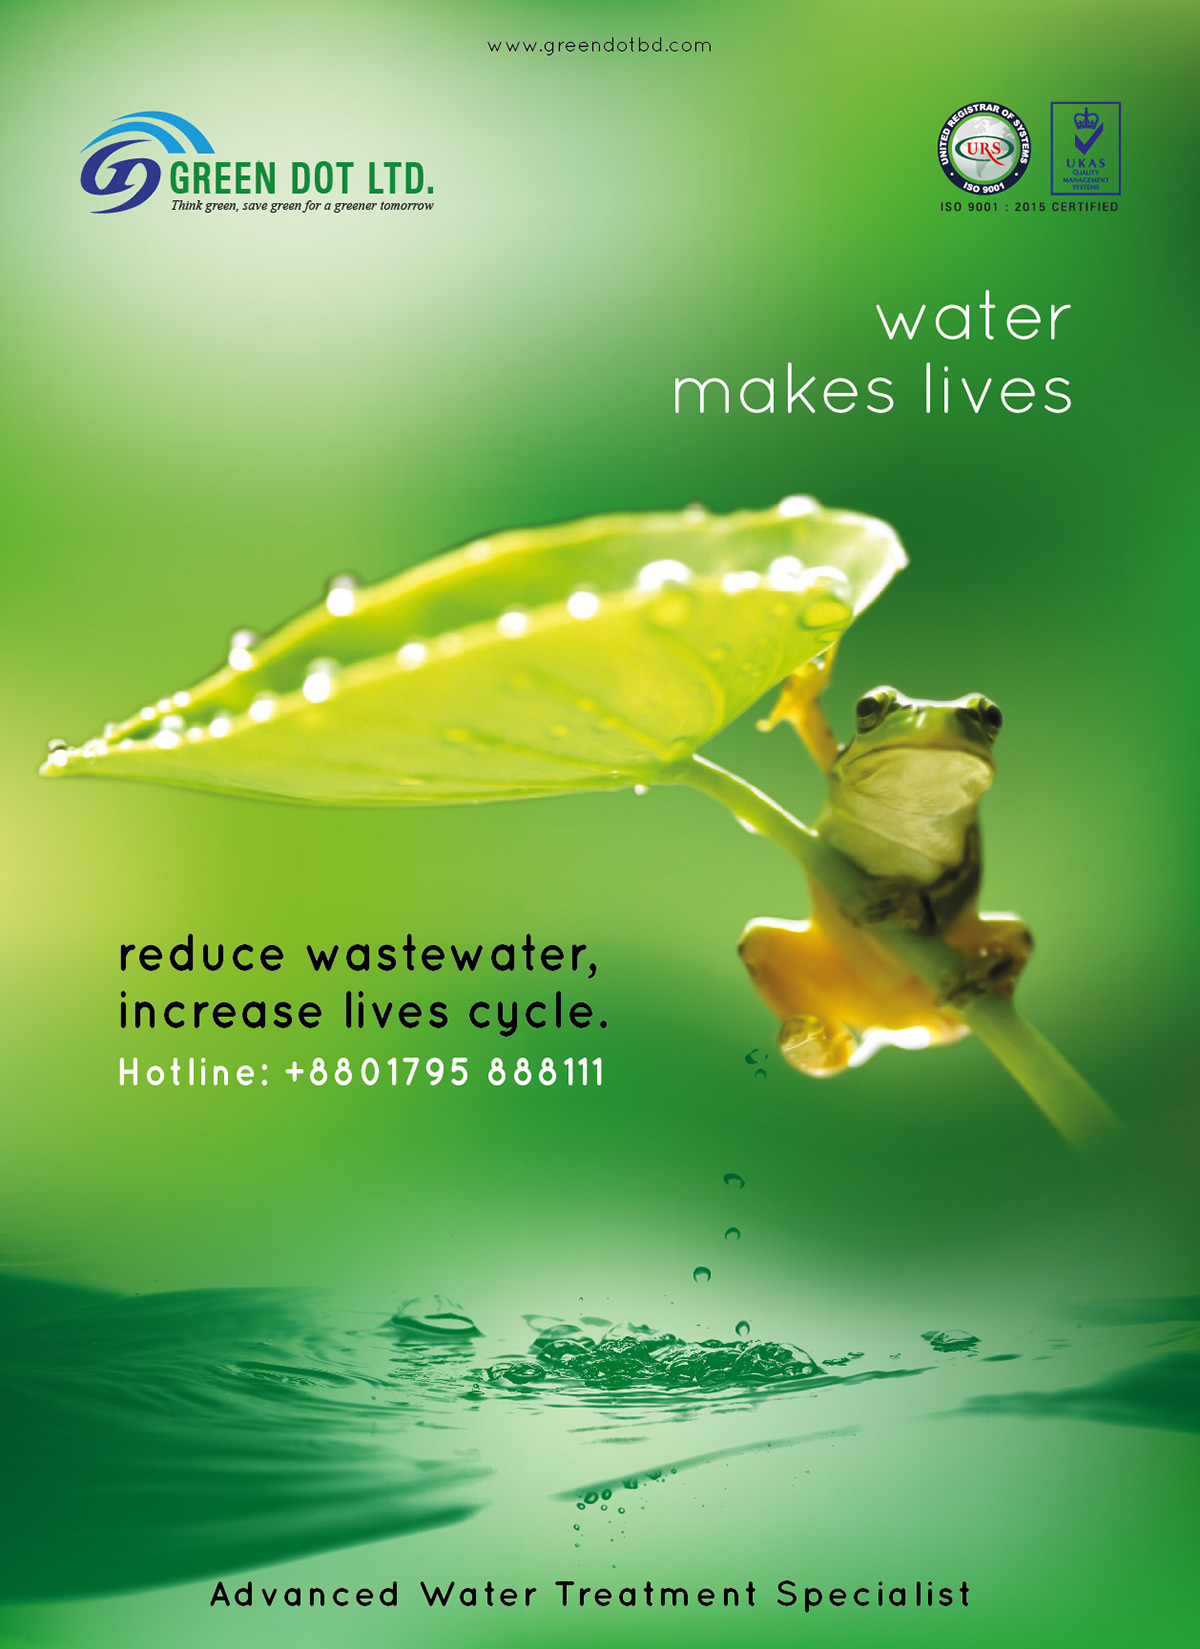 Tree  water earth world environment wastewater life save water plant trees